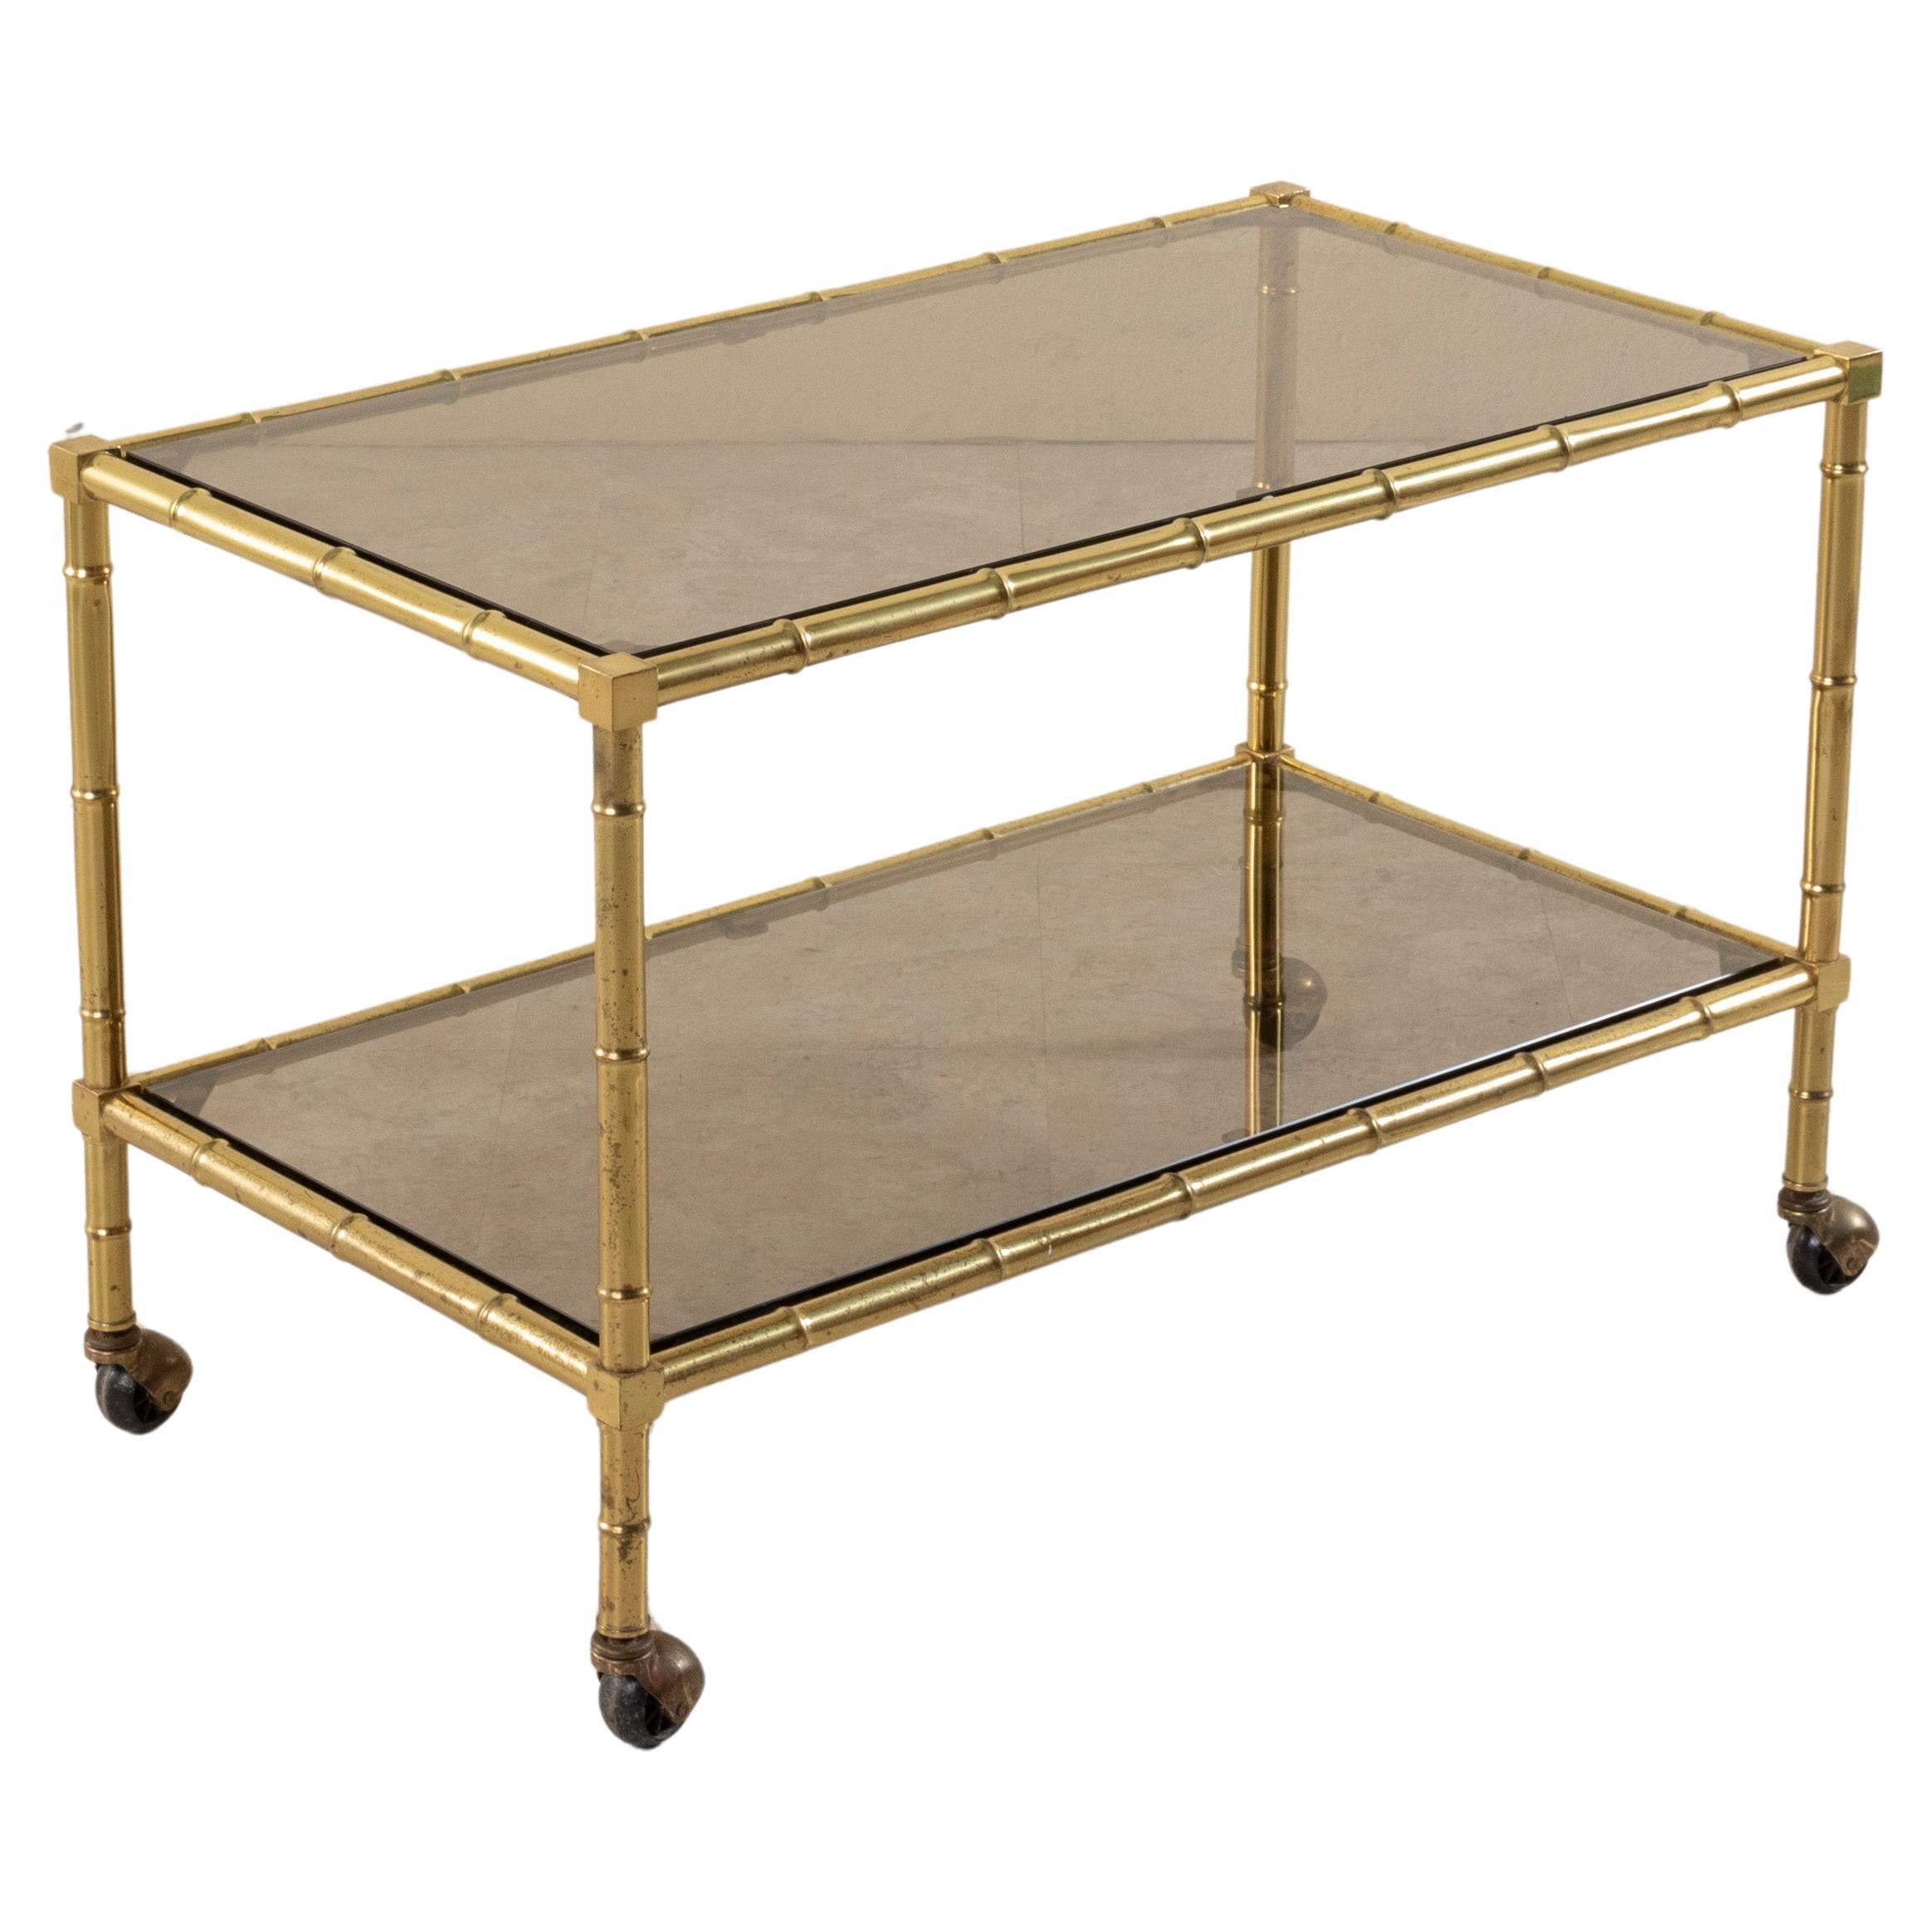 Mid-20th Century French Faux Bamboo Brass and Smoked Glass Coffee Table Bar Cart